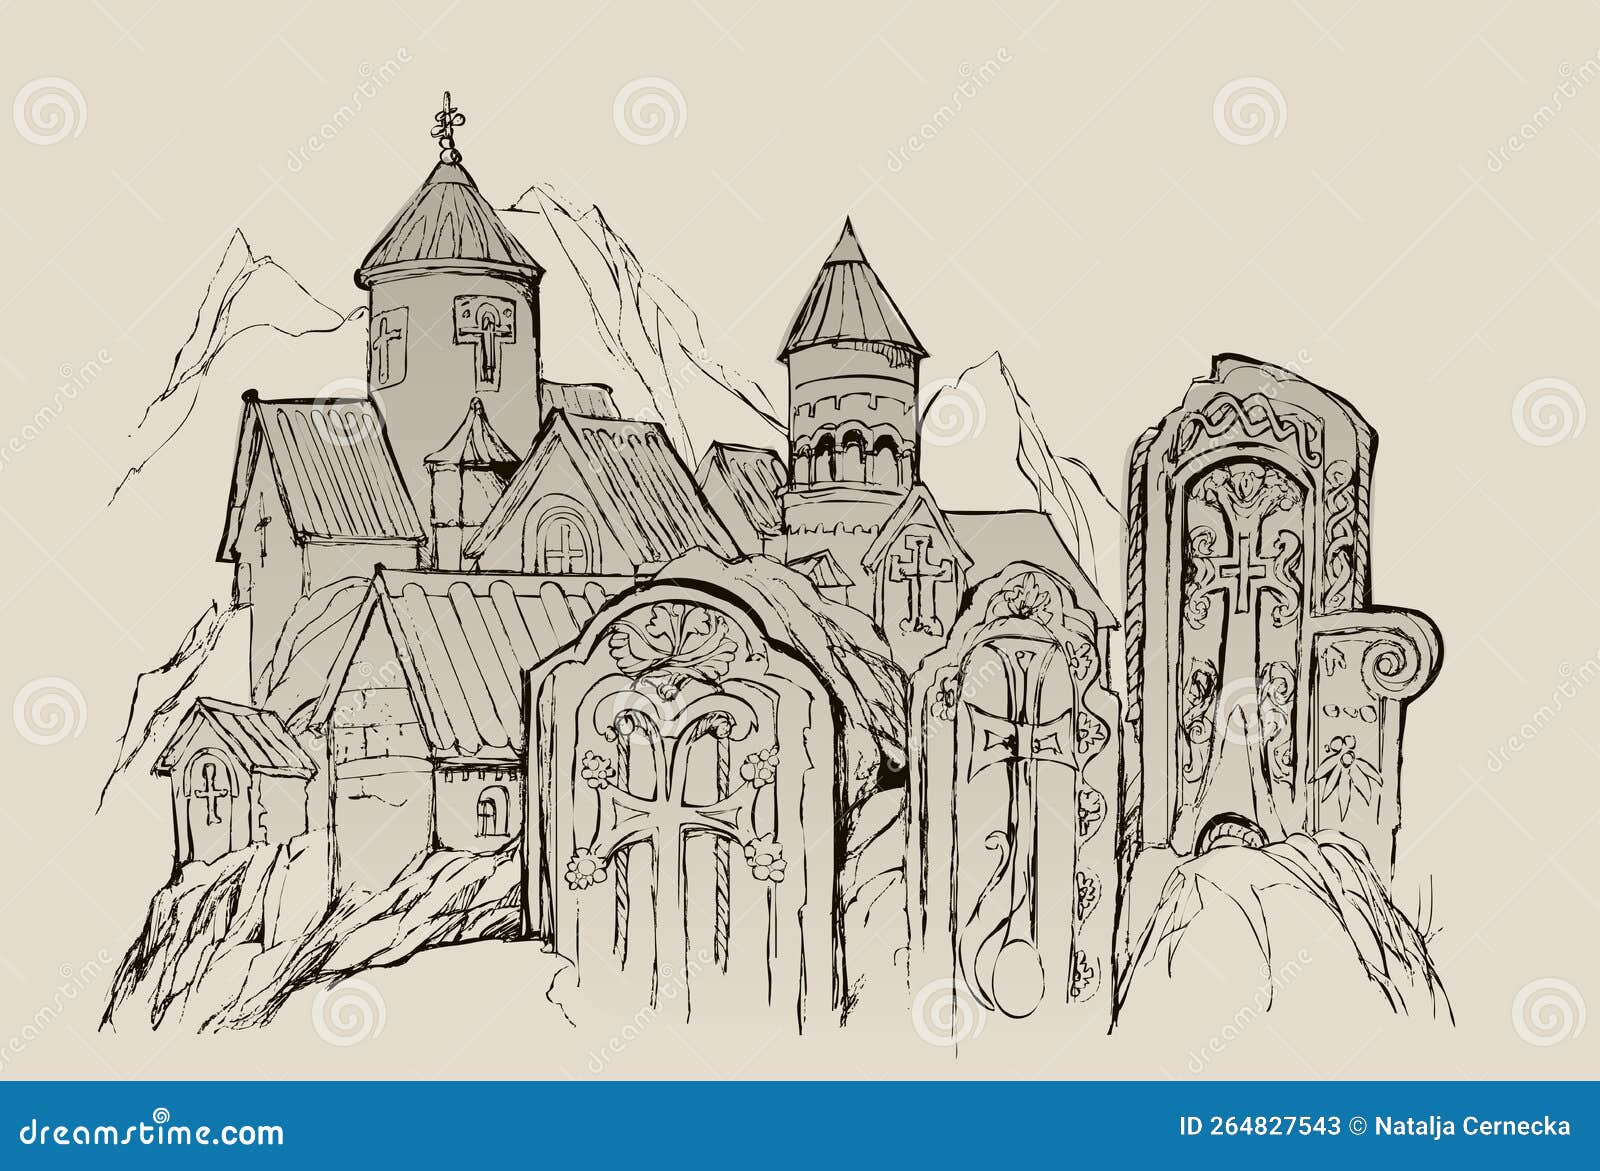 stones of armenia. sketch of ancient church and old armenian khachkar crosses. drawing from nature in vicinity lake sevan. hand